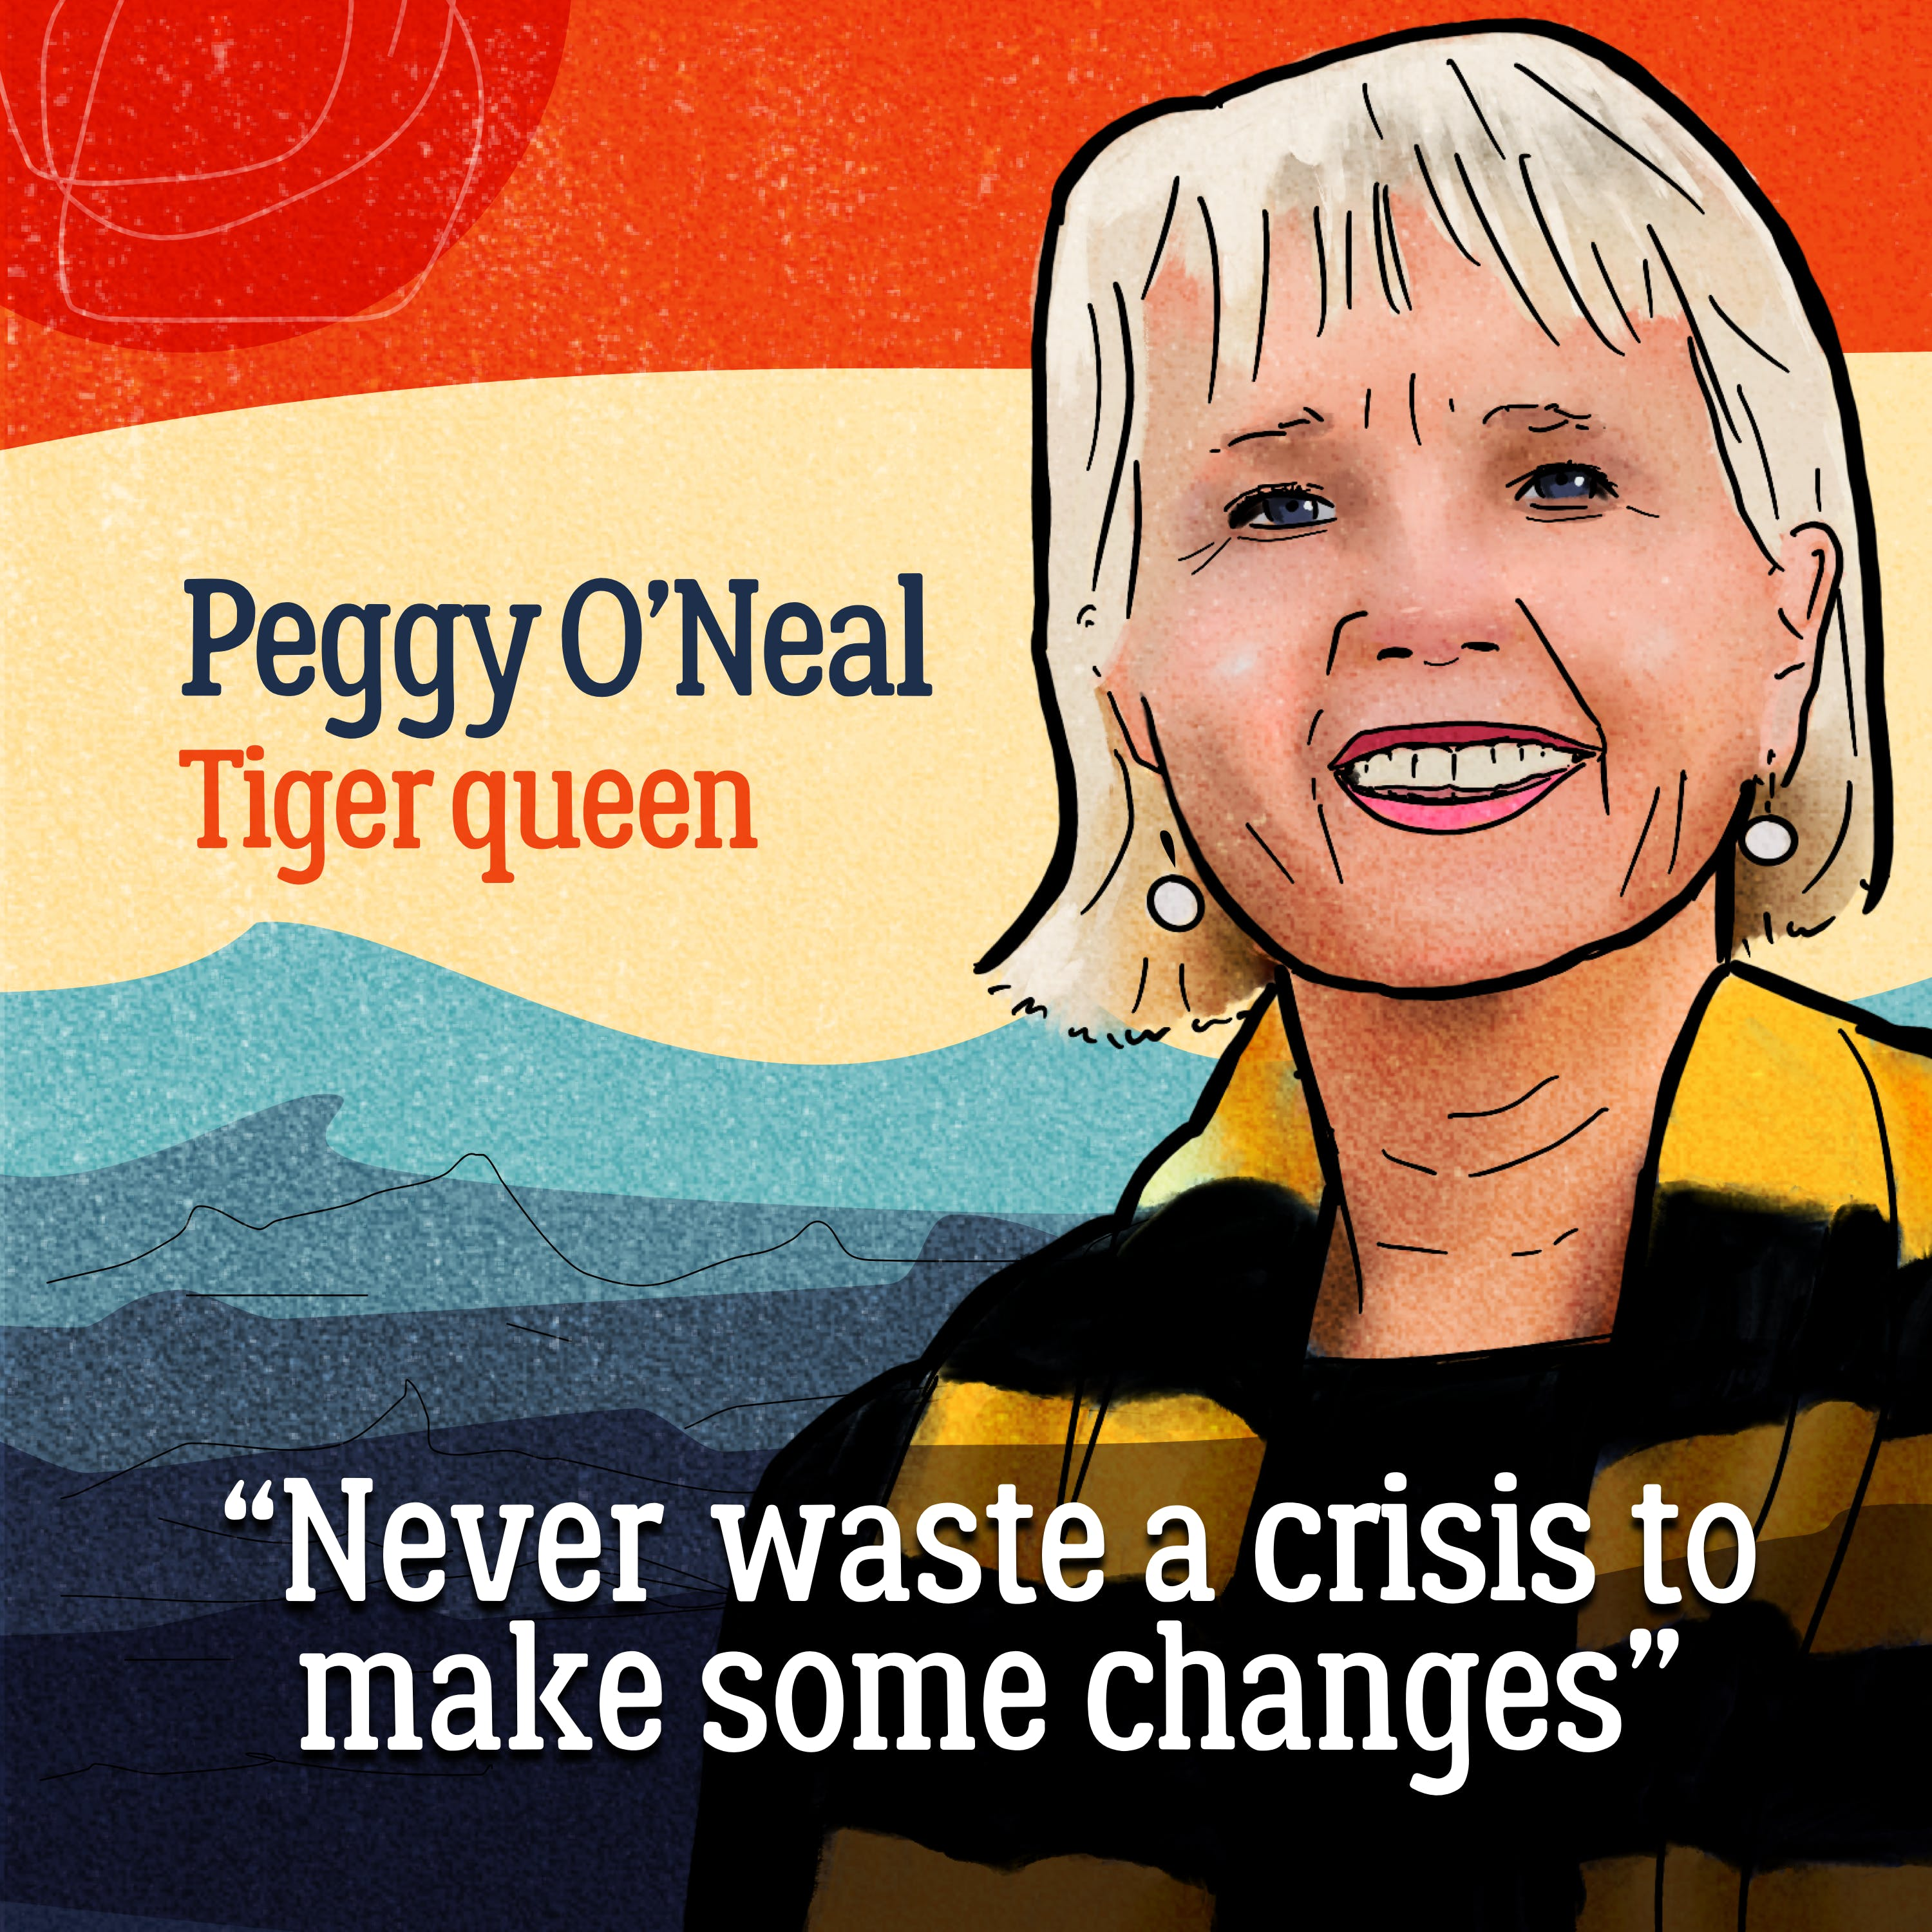 Kicking goals — Peggy O’Neal stares down the competition 